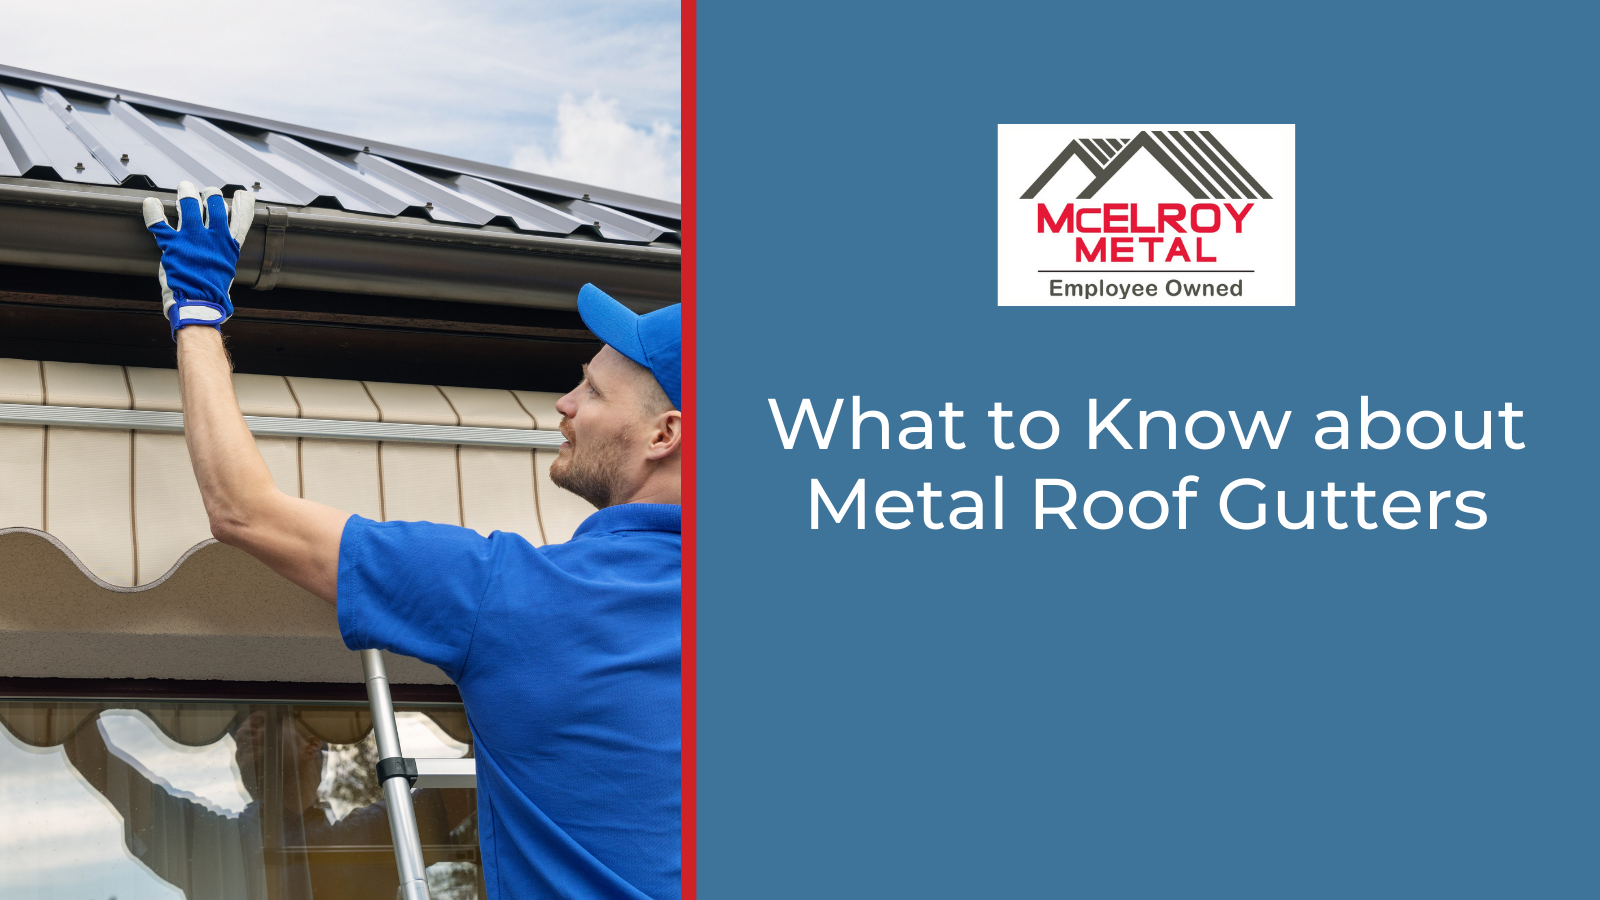 What to Know about Metal Roof Gutters